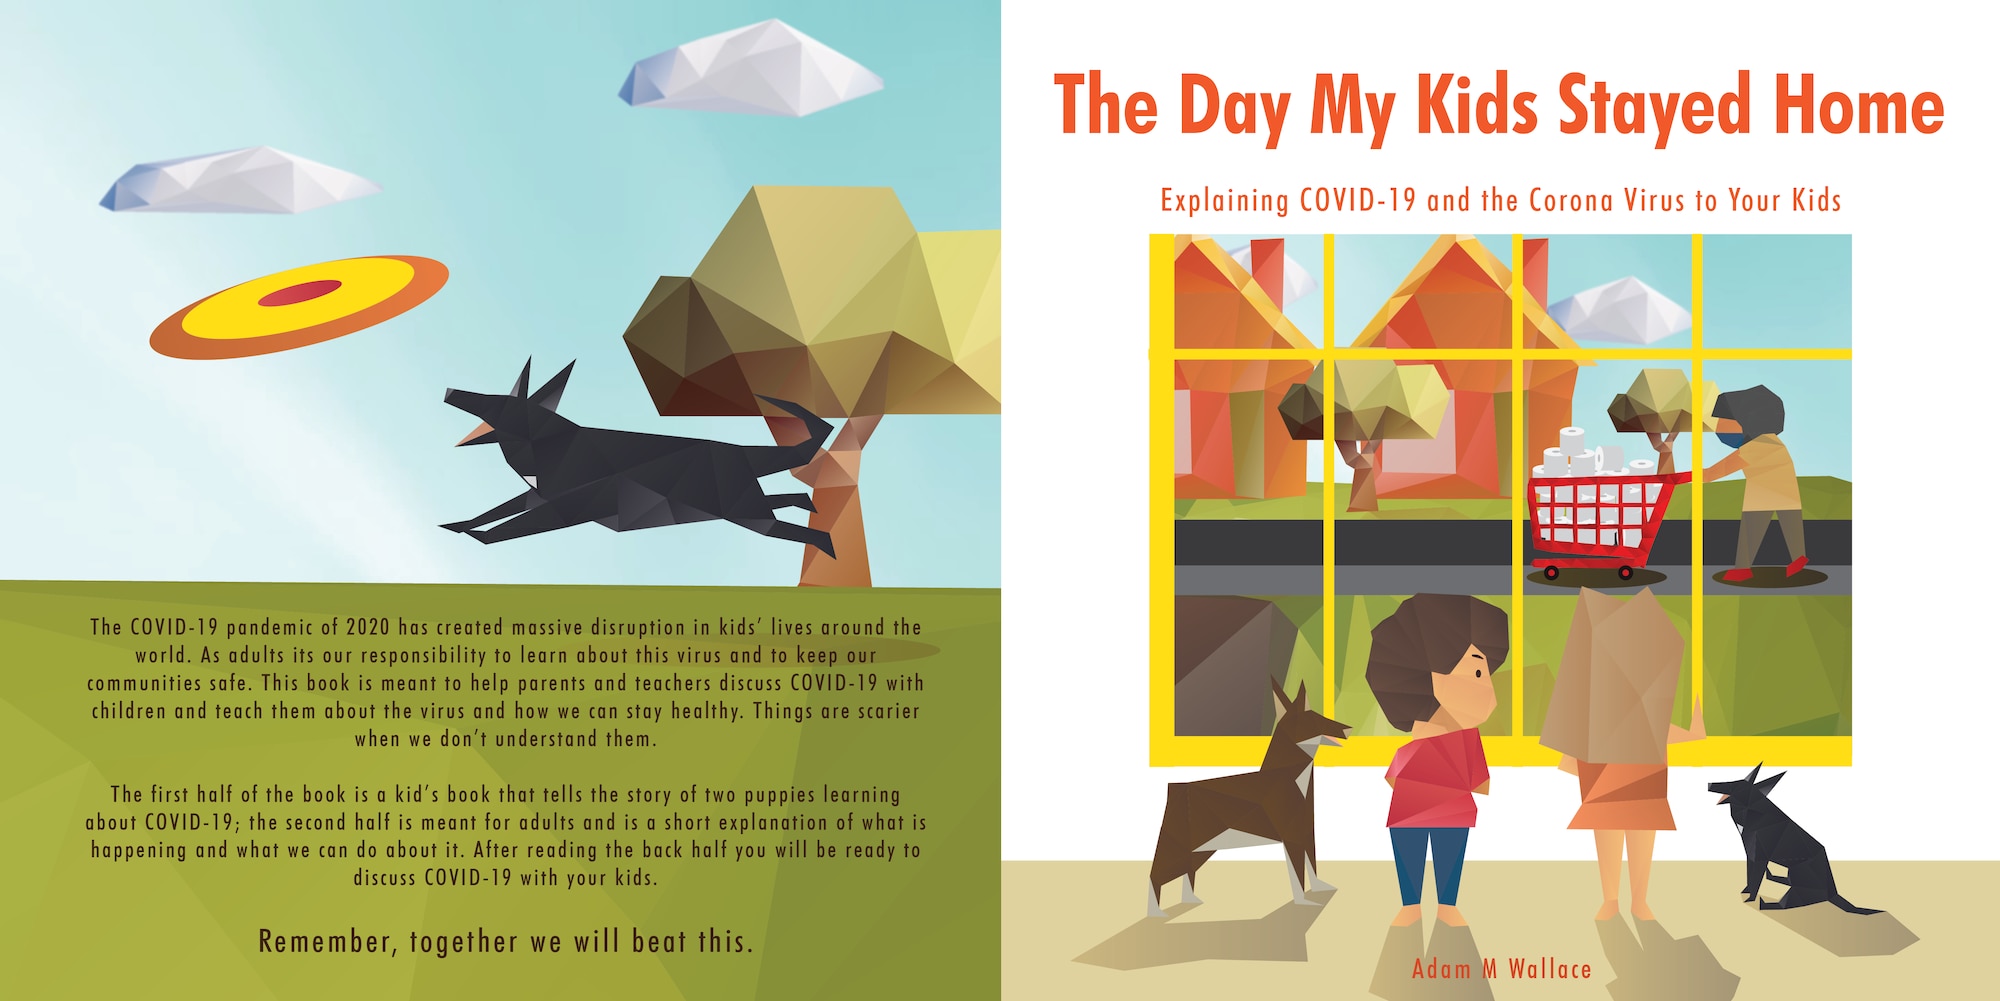 The digital book covers for “The Day My Kids Stayed Home” children’s book that discusses the COVID-19 pandemic in a positive format that informs both kids and parents about the need for physical distancing at Fairchild Air Force Base, Washington, April 1, 2020. (U.S. Air Force photo Staff Sgt. Ryan Lackey)